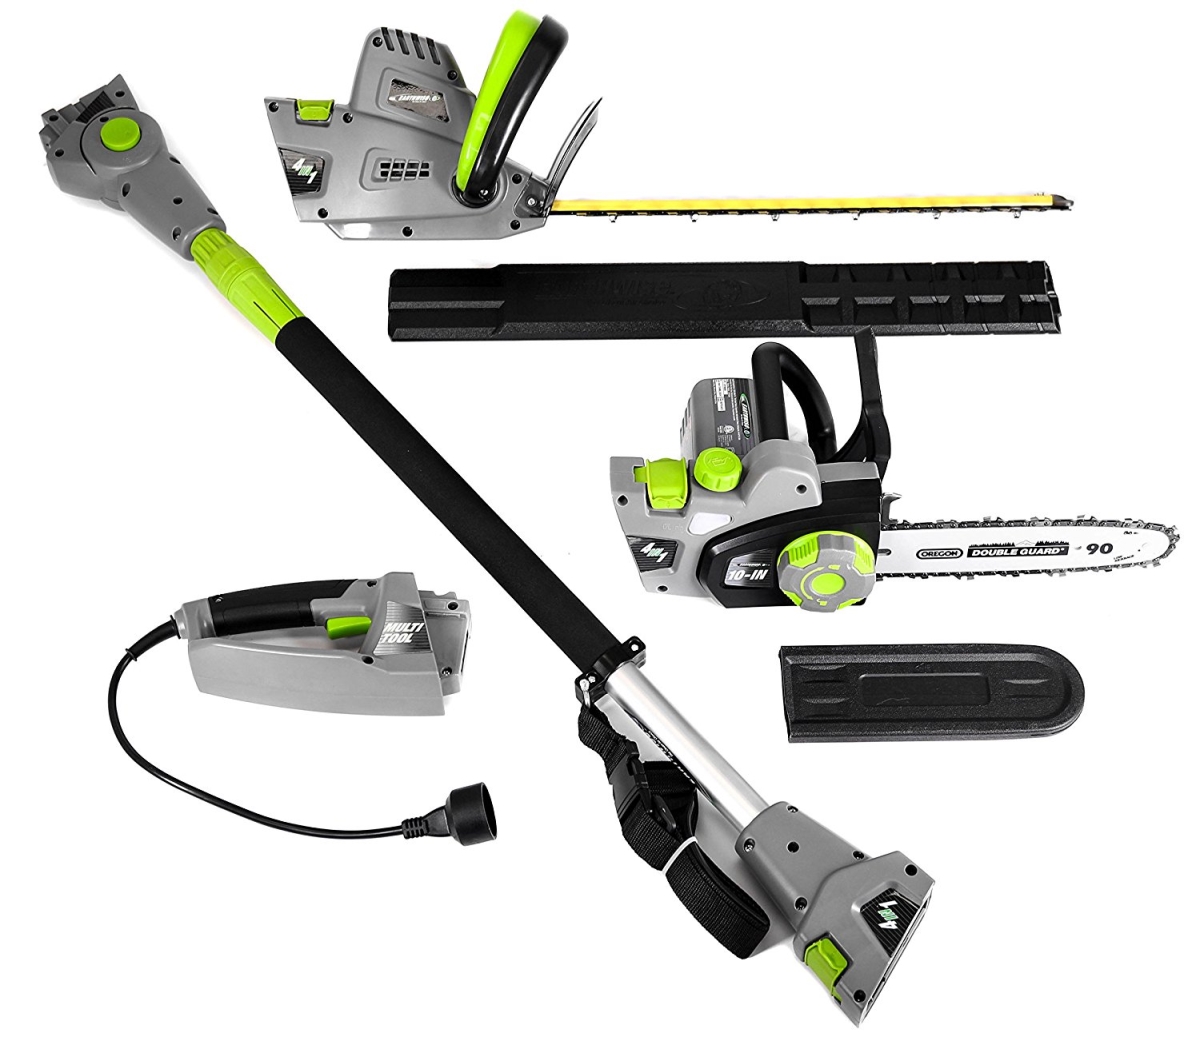 Picture of Earthwise CVP41810 4-in-1 Multi-Tool Pole with Handheld Hedge Trimmer Pole & Handheld Chain Saw